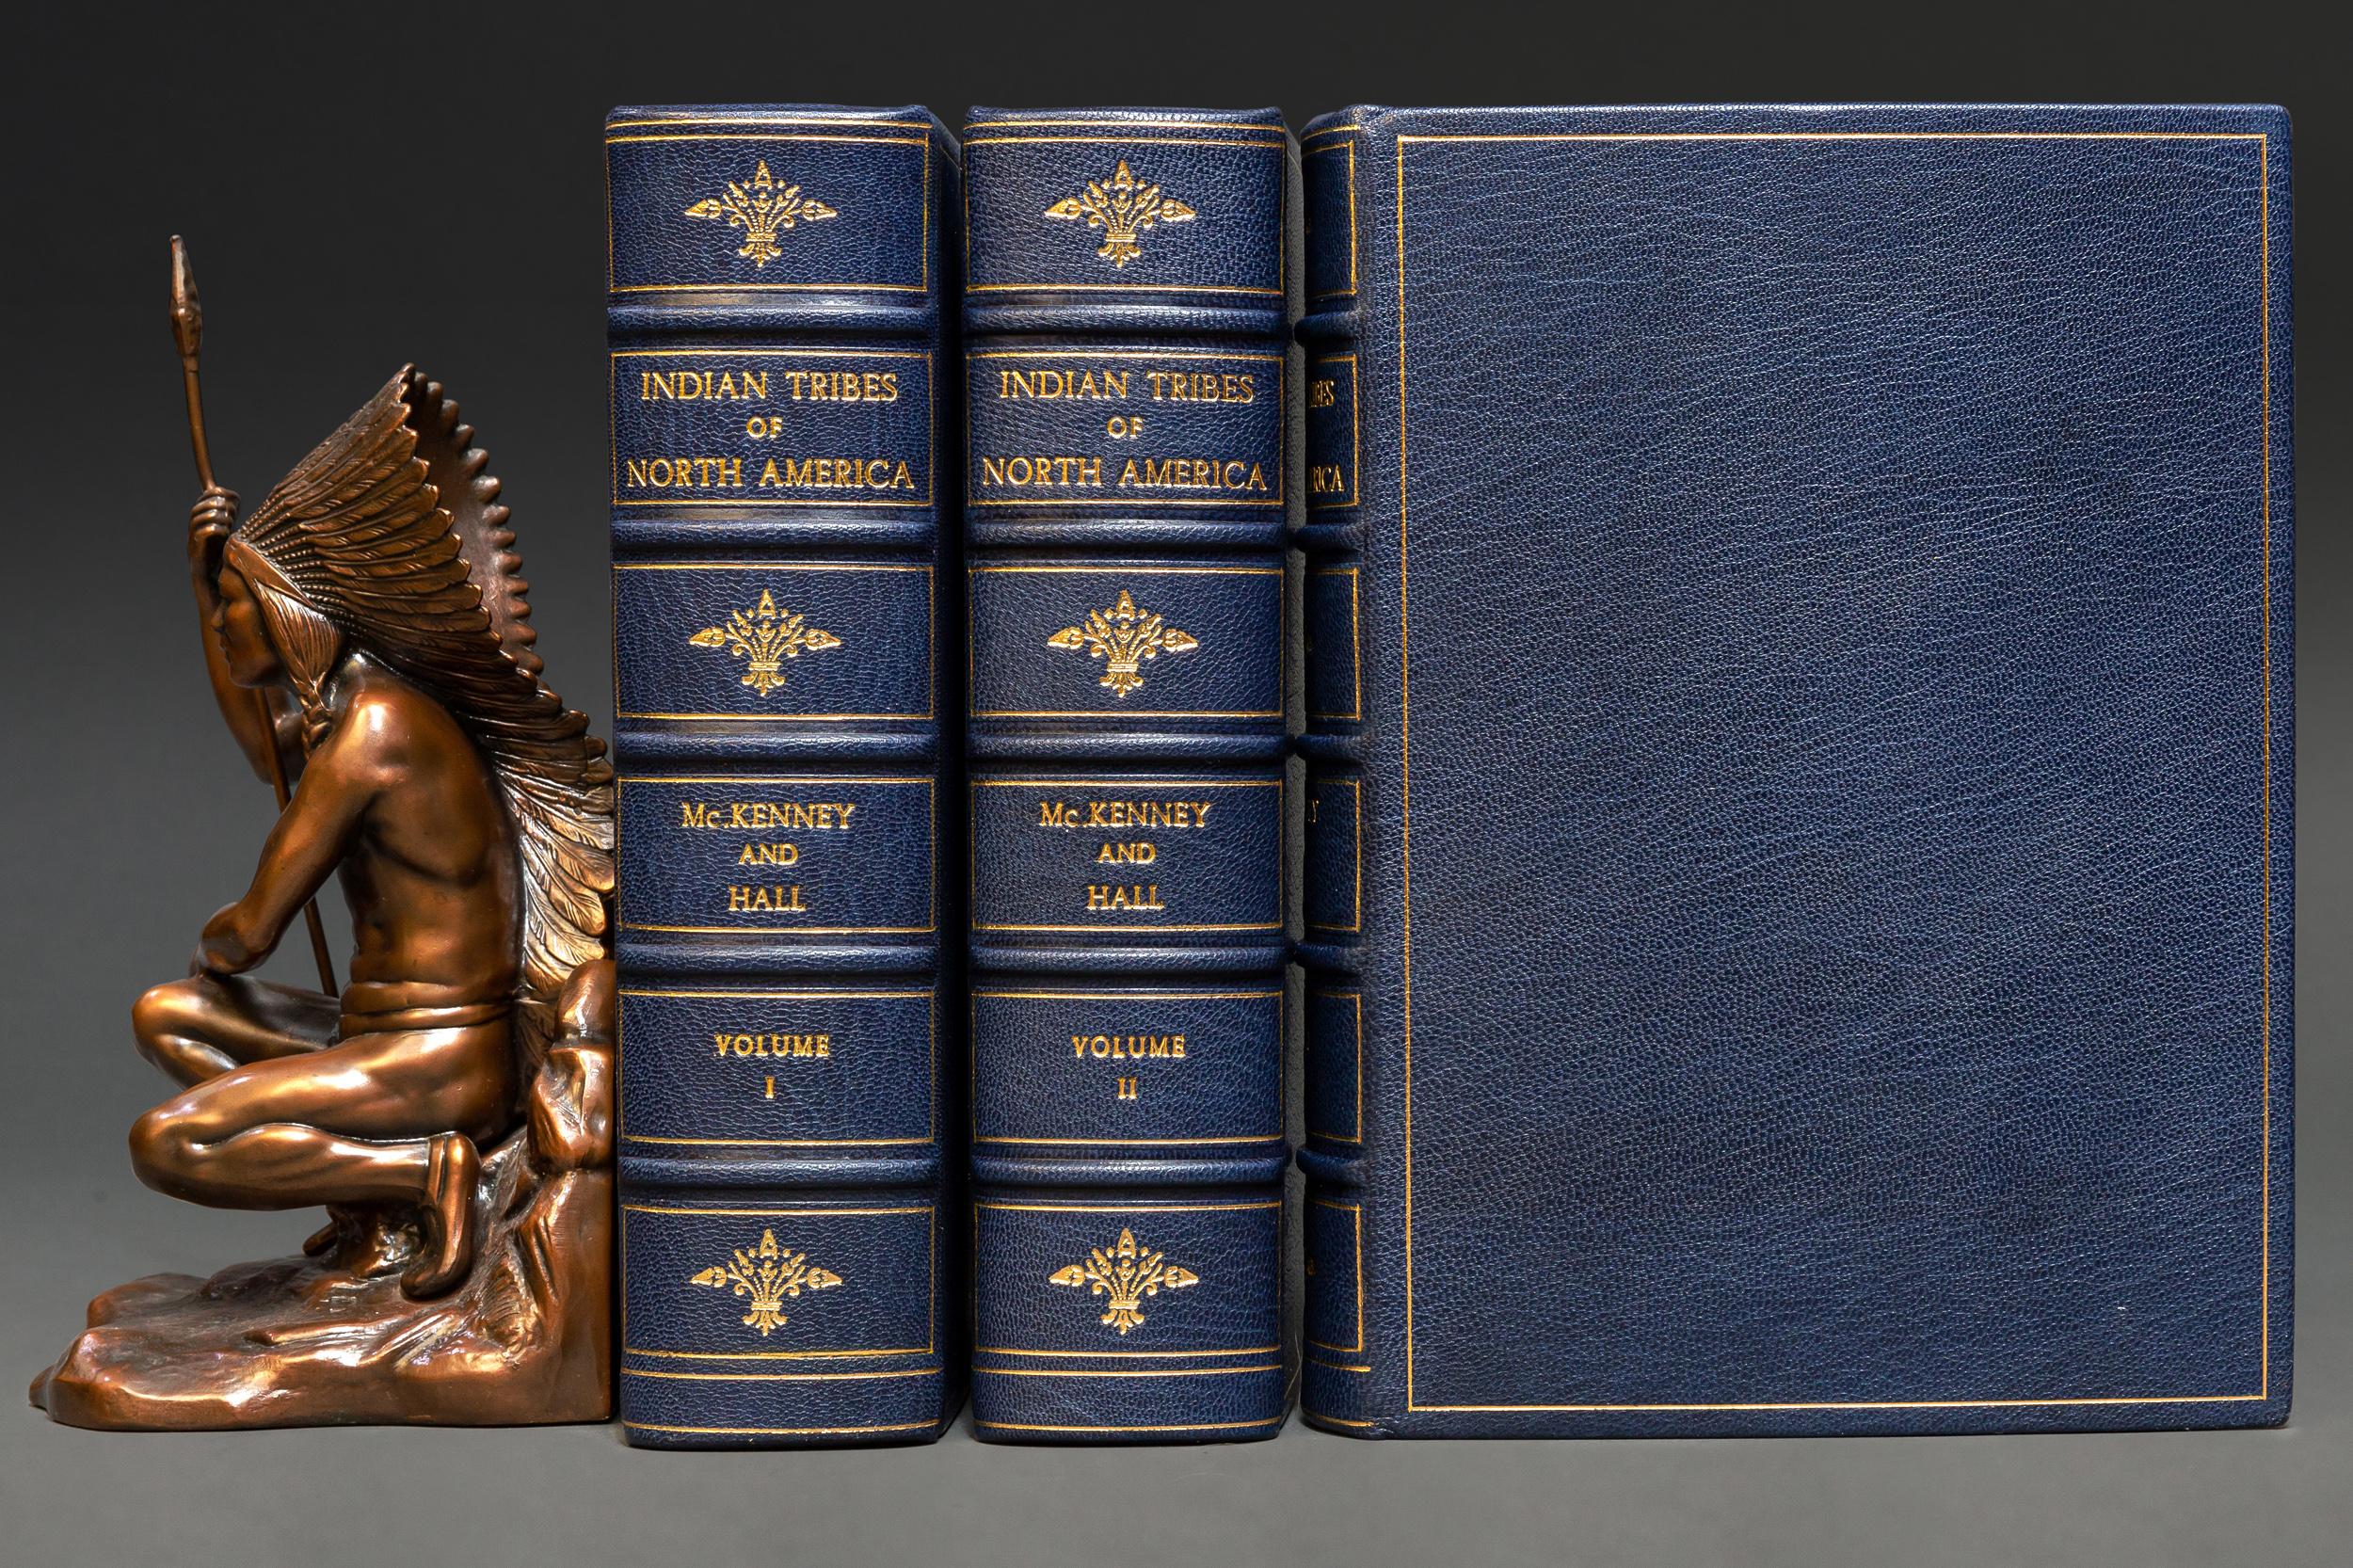 Scottish 3 Volumes. Thomas L. McKenney & James Hall, The Indian Tribes of North America